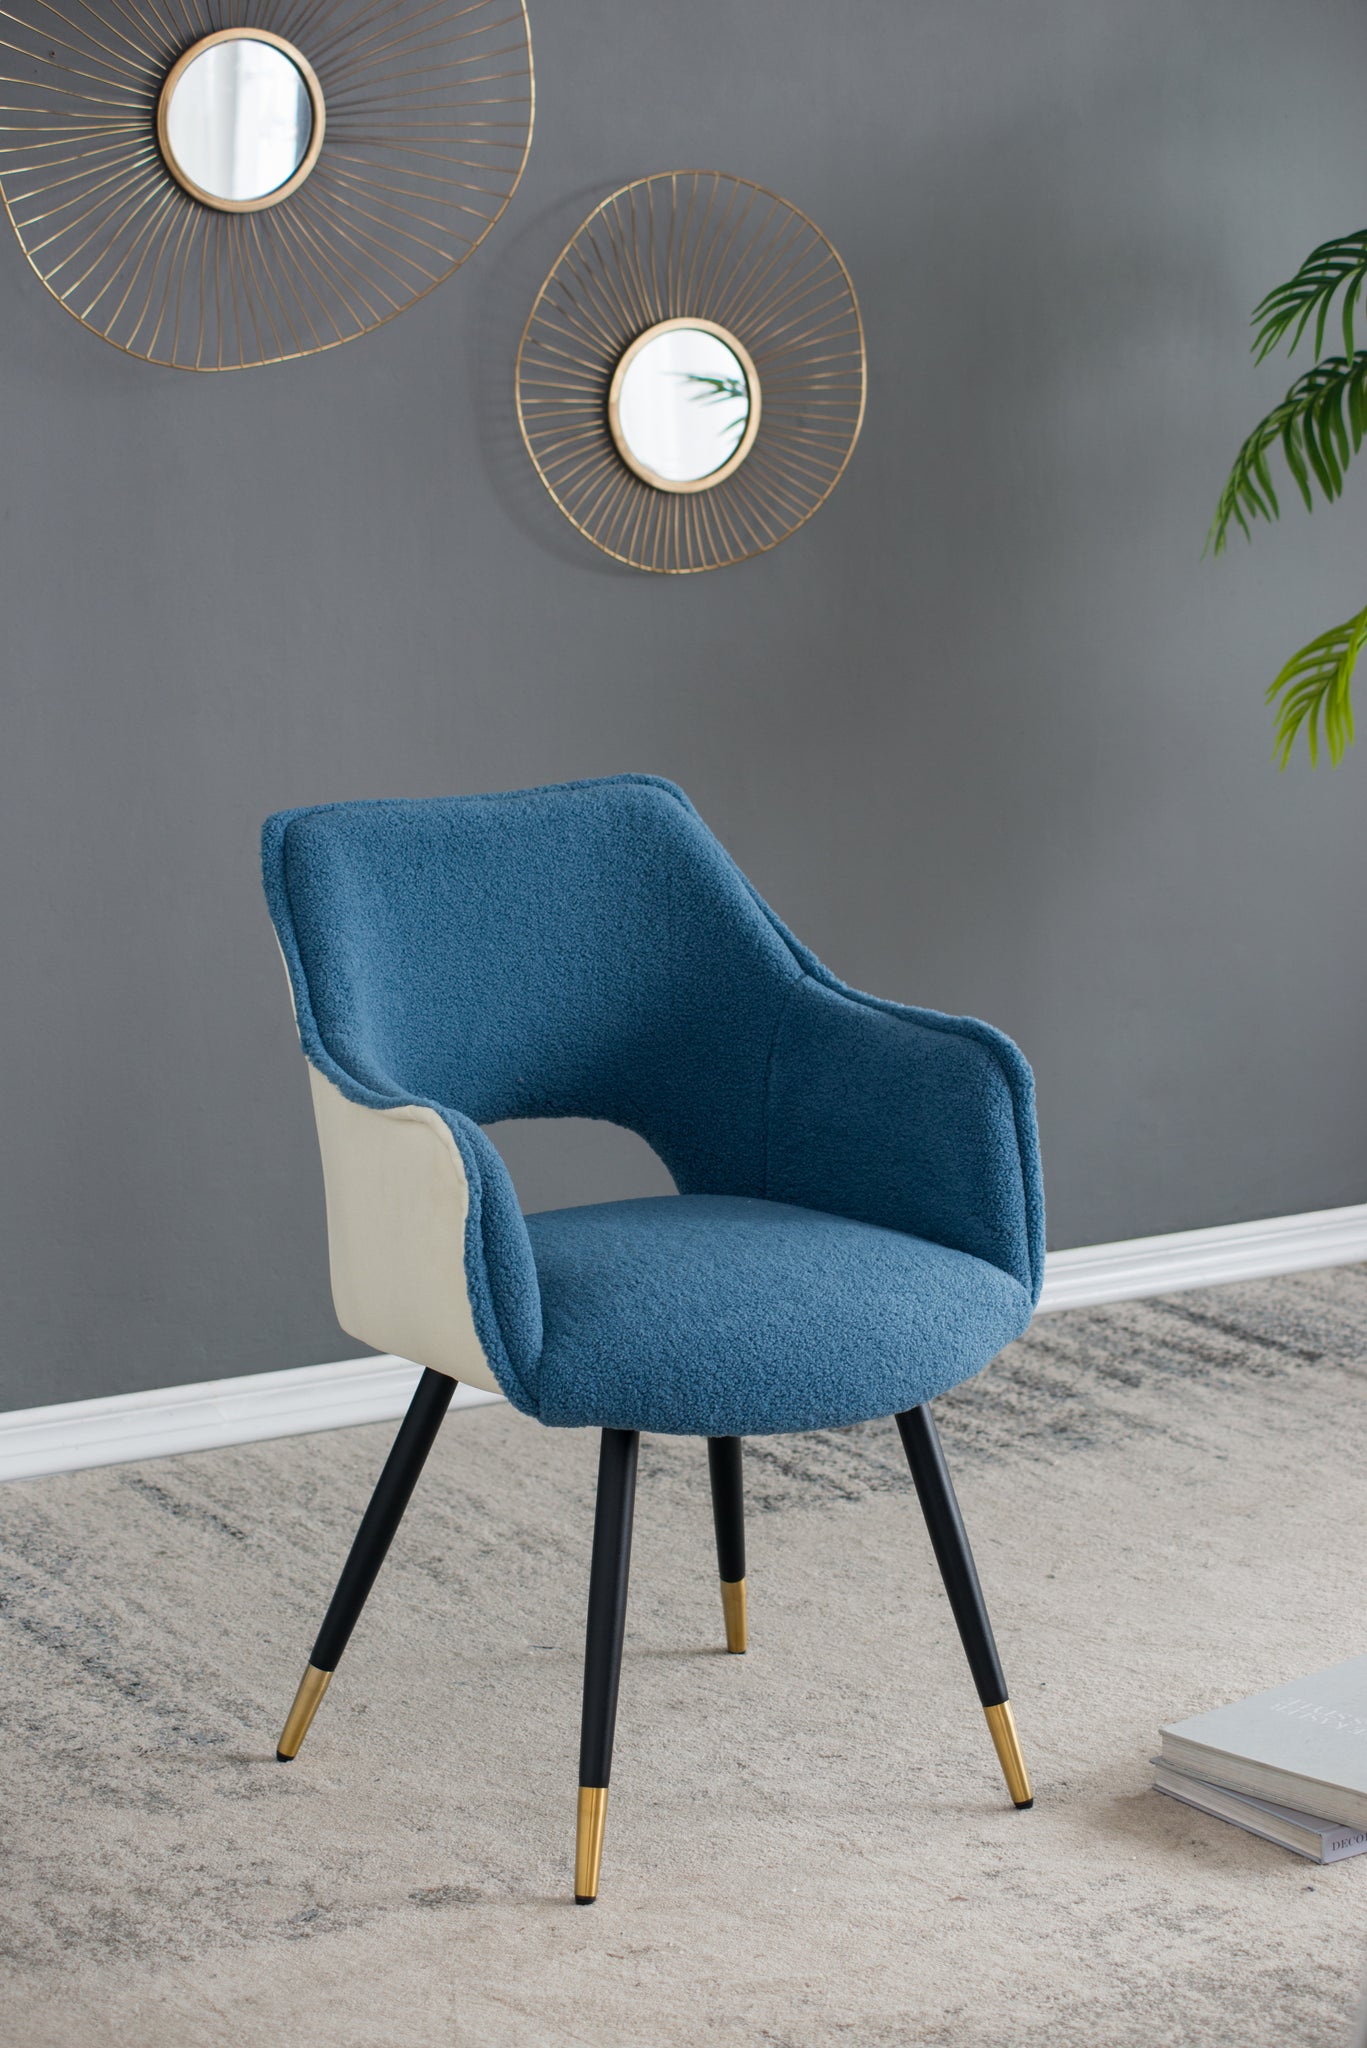 Set of 2 Blue Fabric Side Chair, Living Room